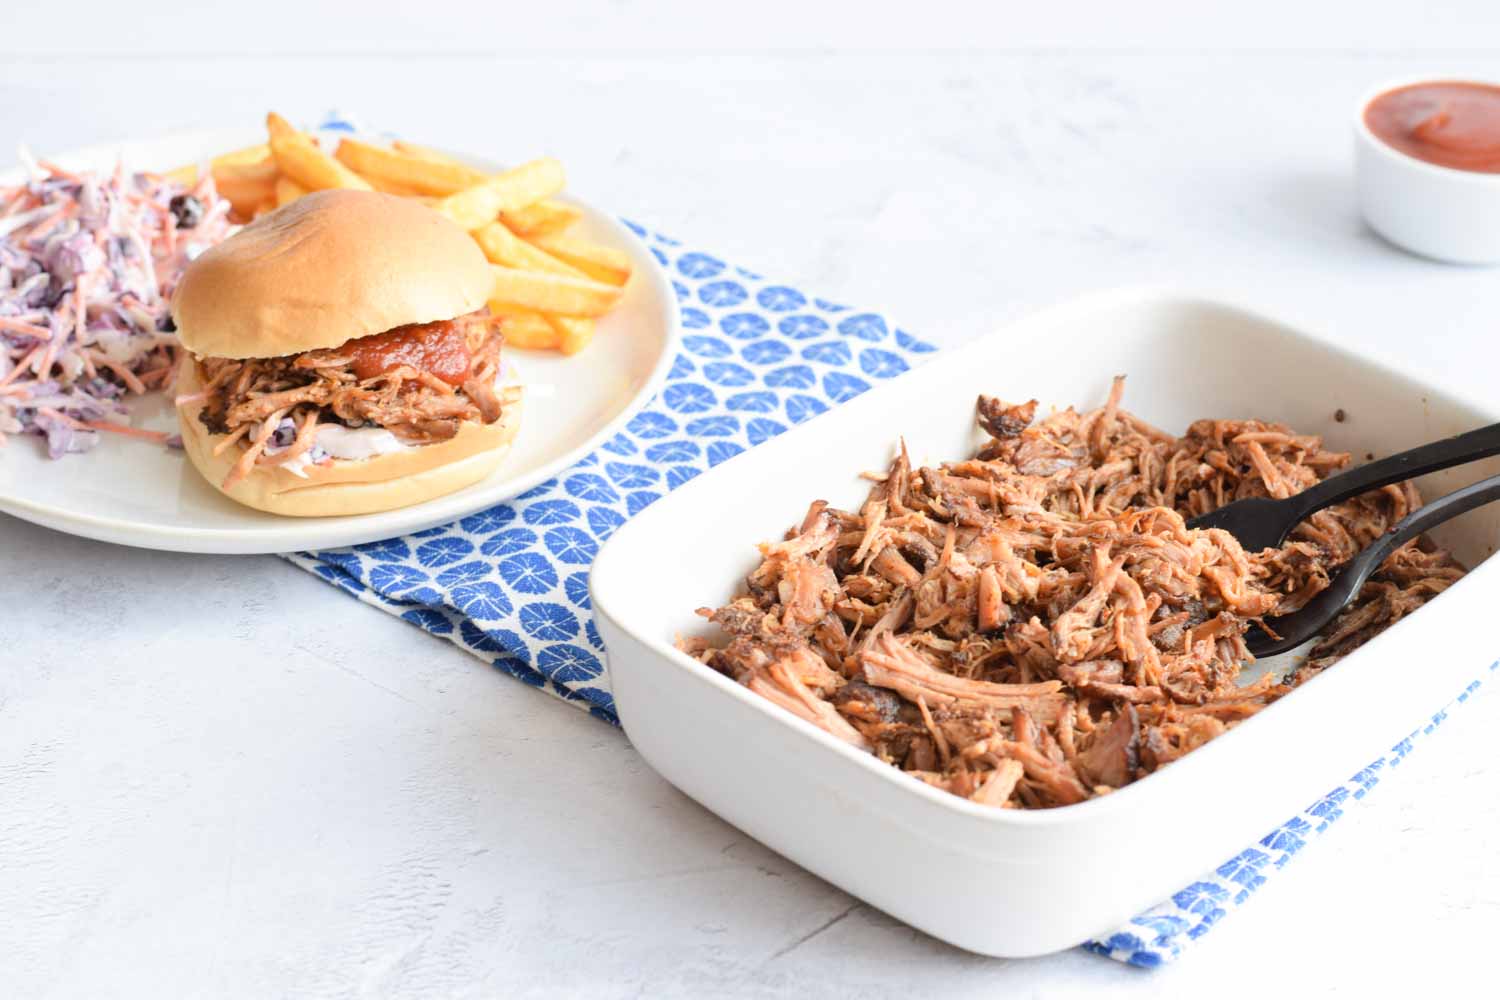 A bowl of pulled pork with a plate behind it with pulled pork on a bun, coleslaw and fries